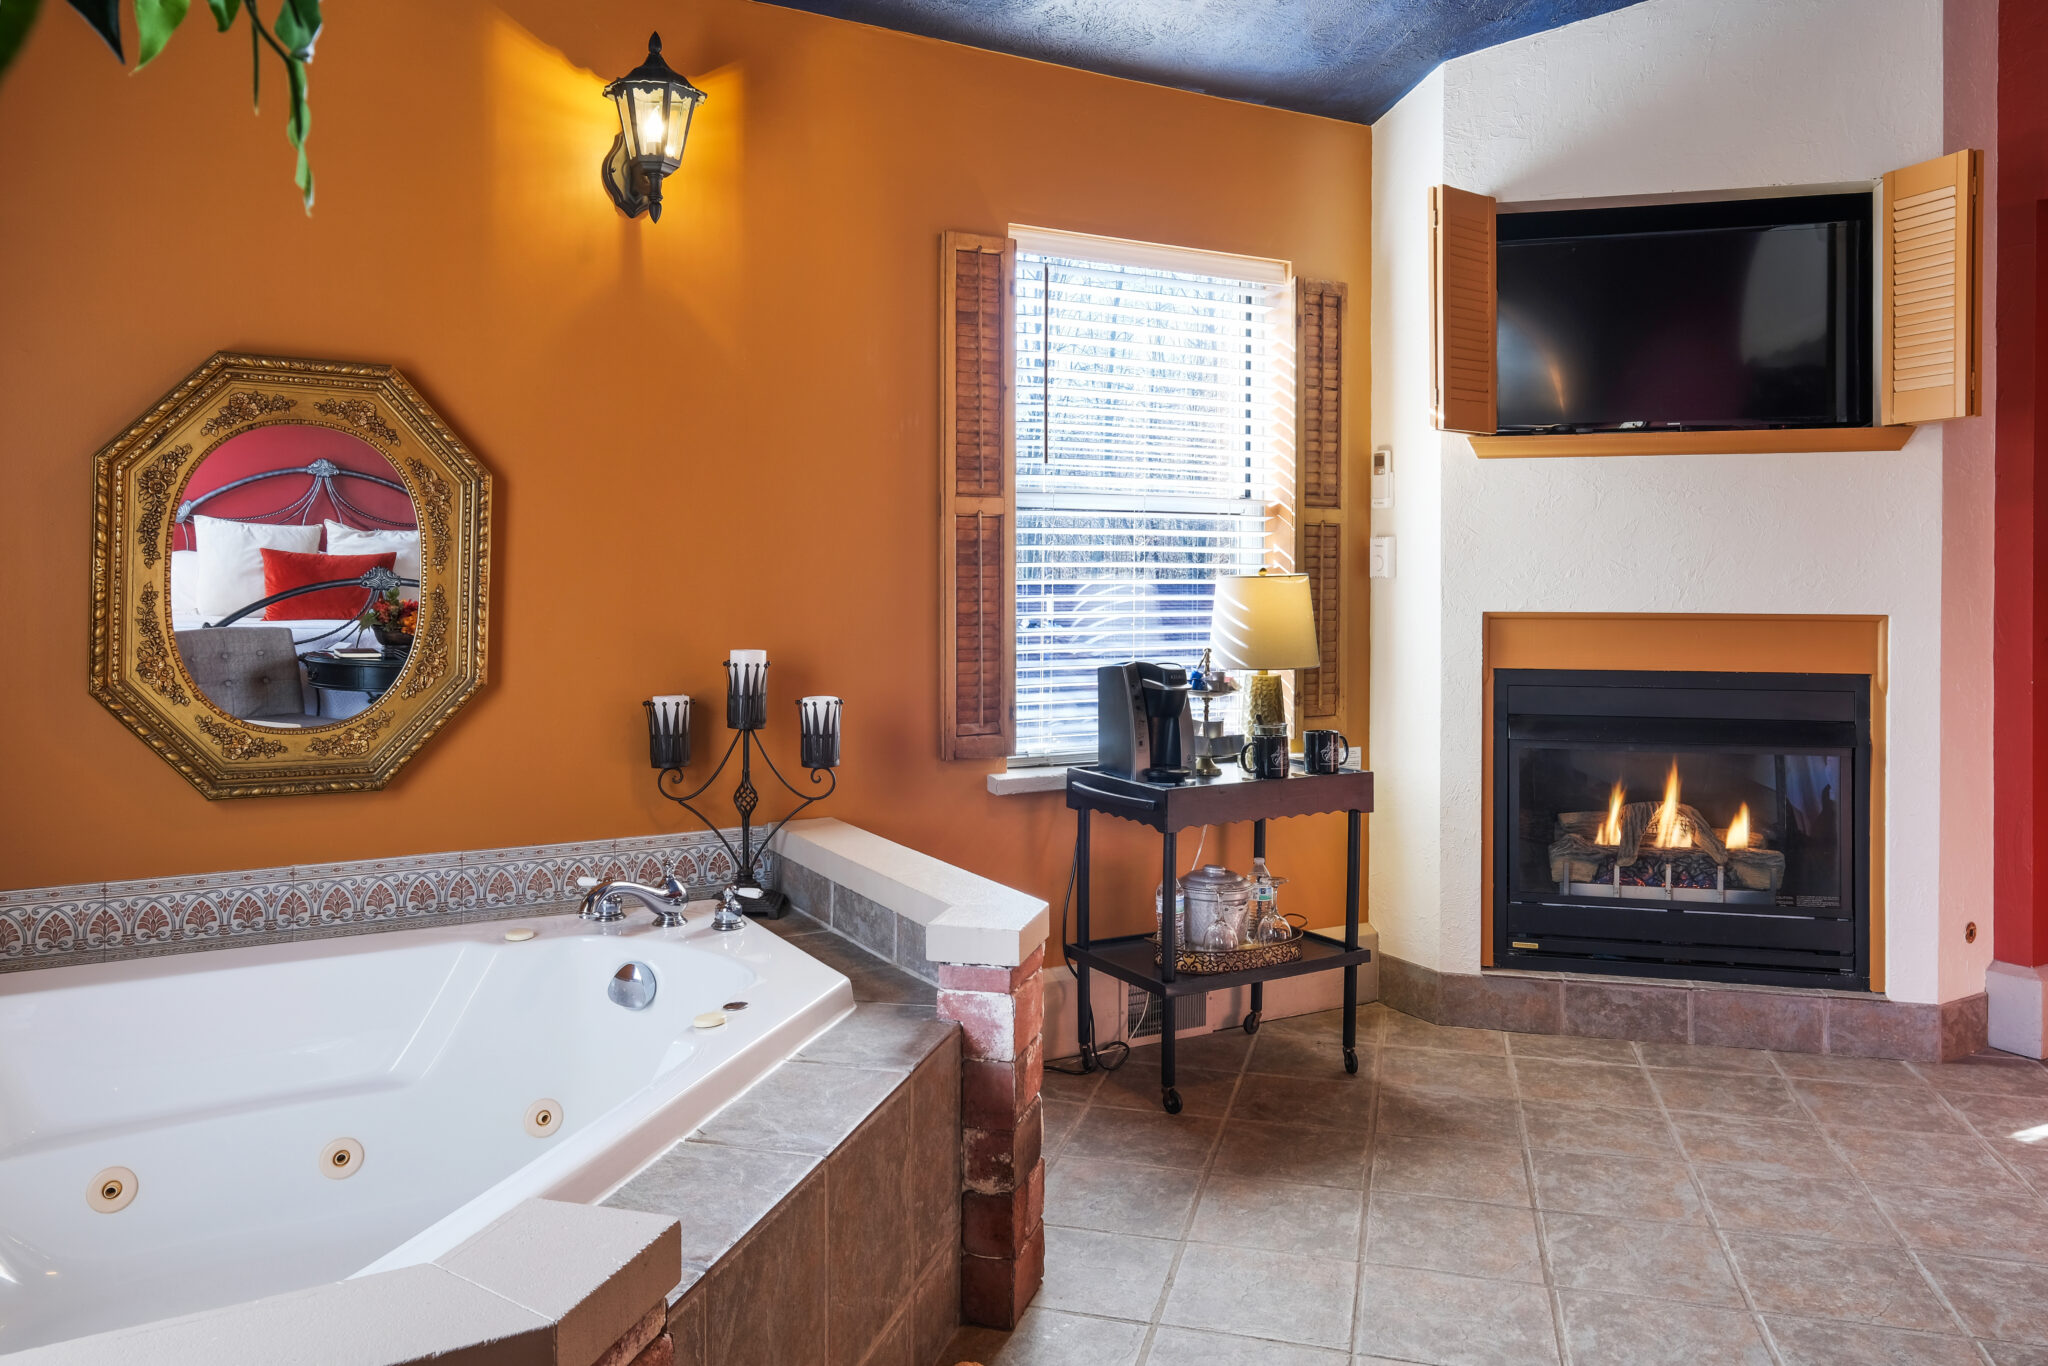 Two person whirlpool tub with a view of the fireplace.